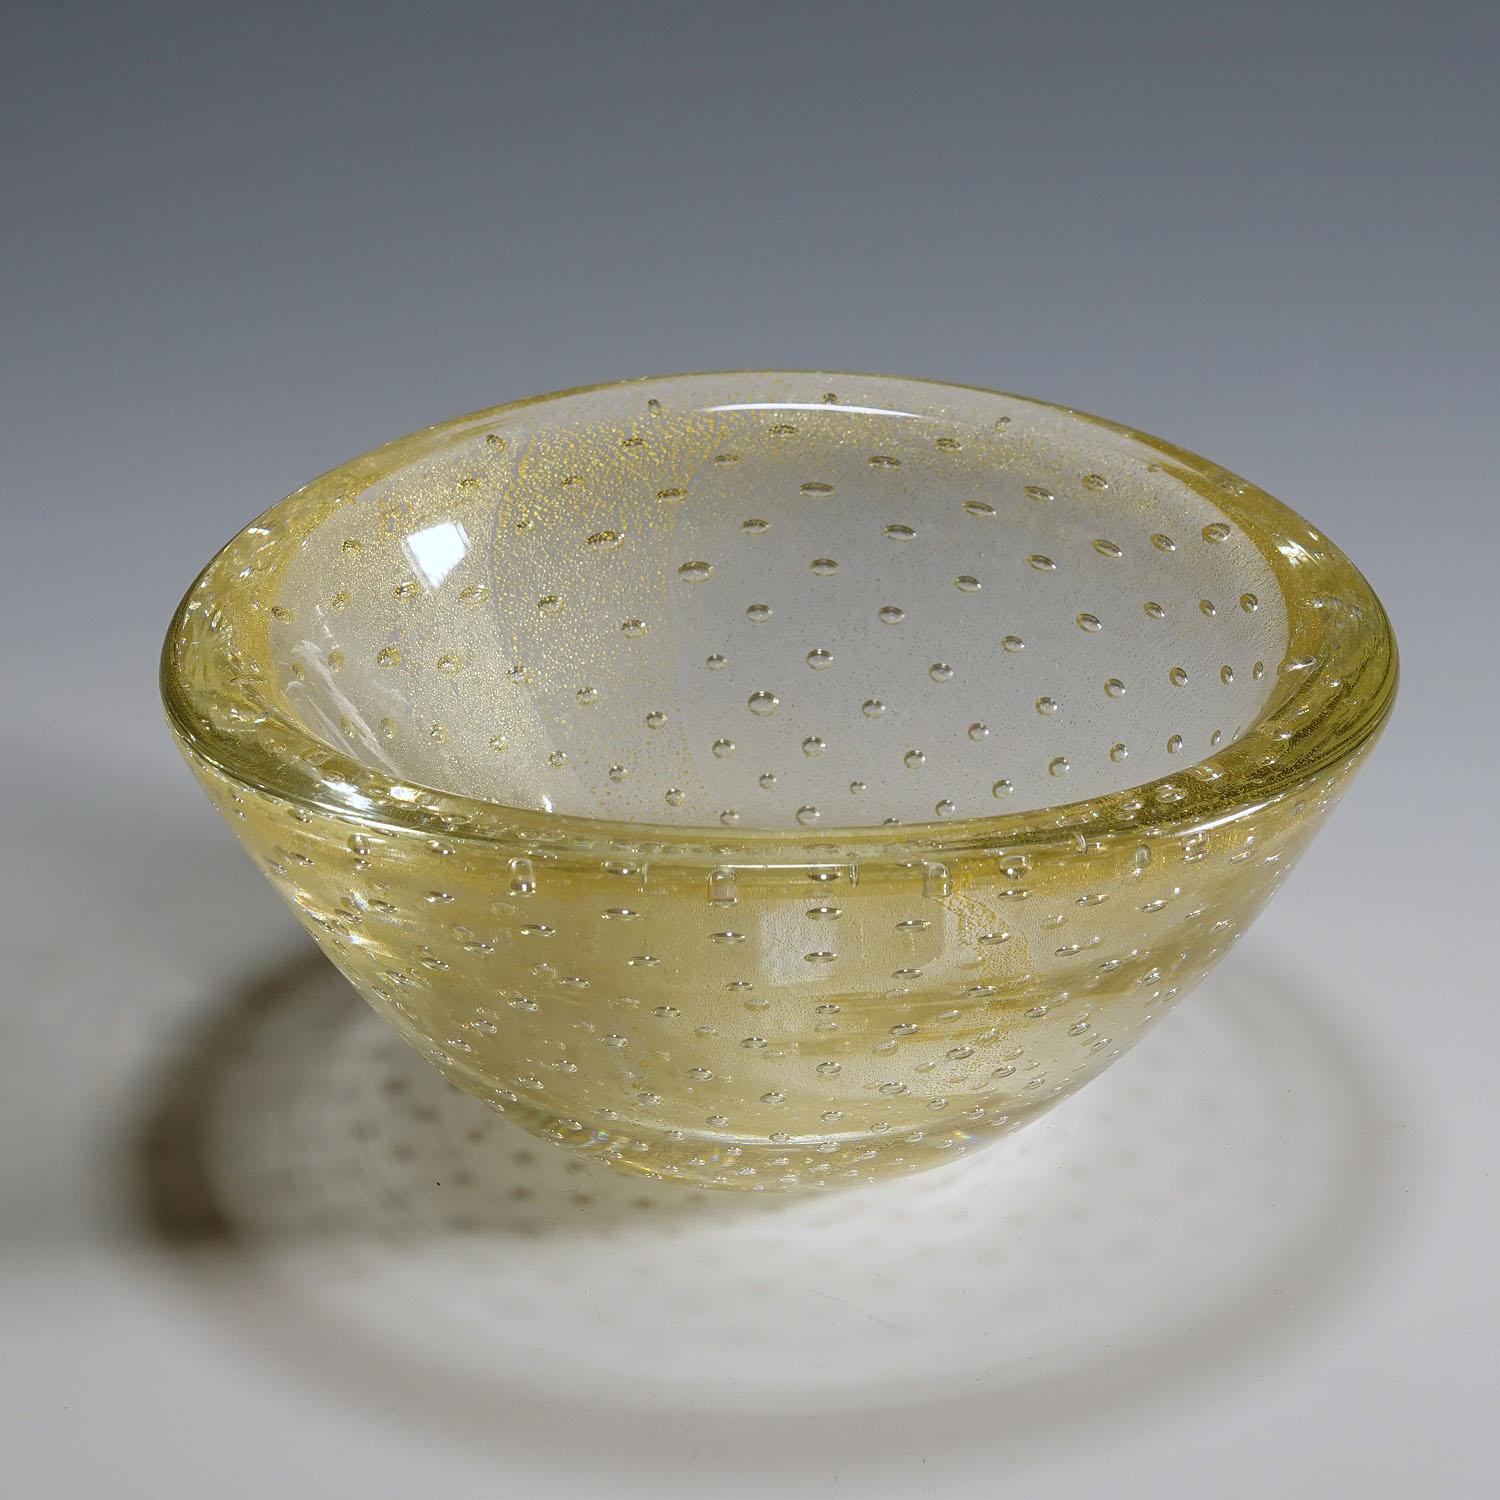 Italian Vintage Art Glass Bowl with Gold Foil by Barovier, Murano Italy, 1950s For Sale